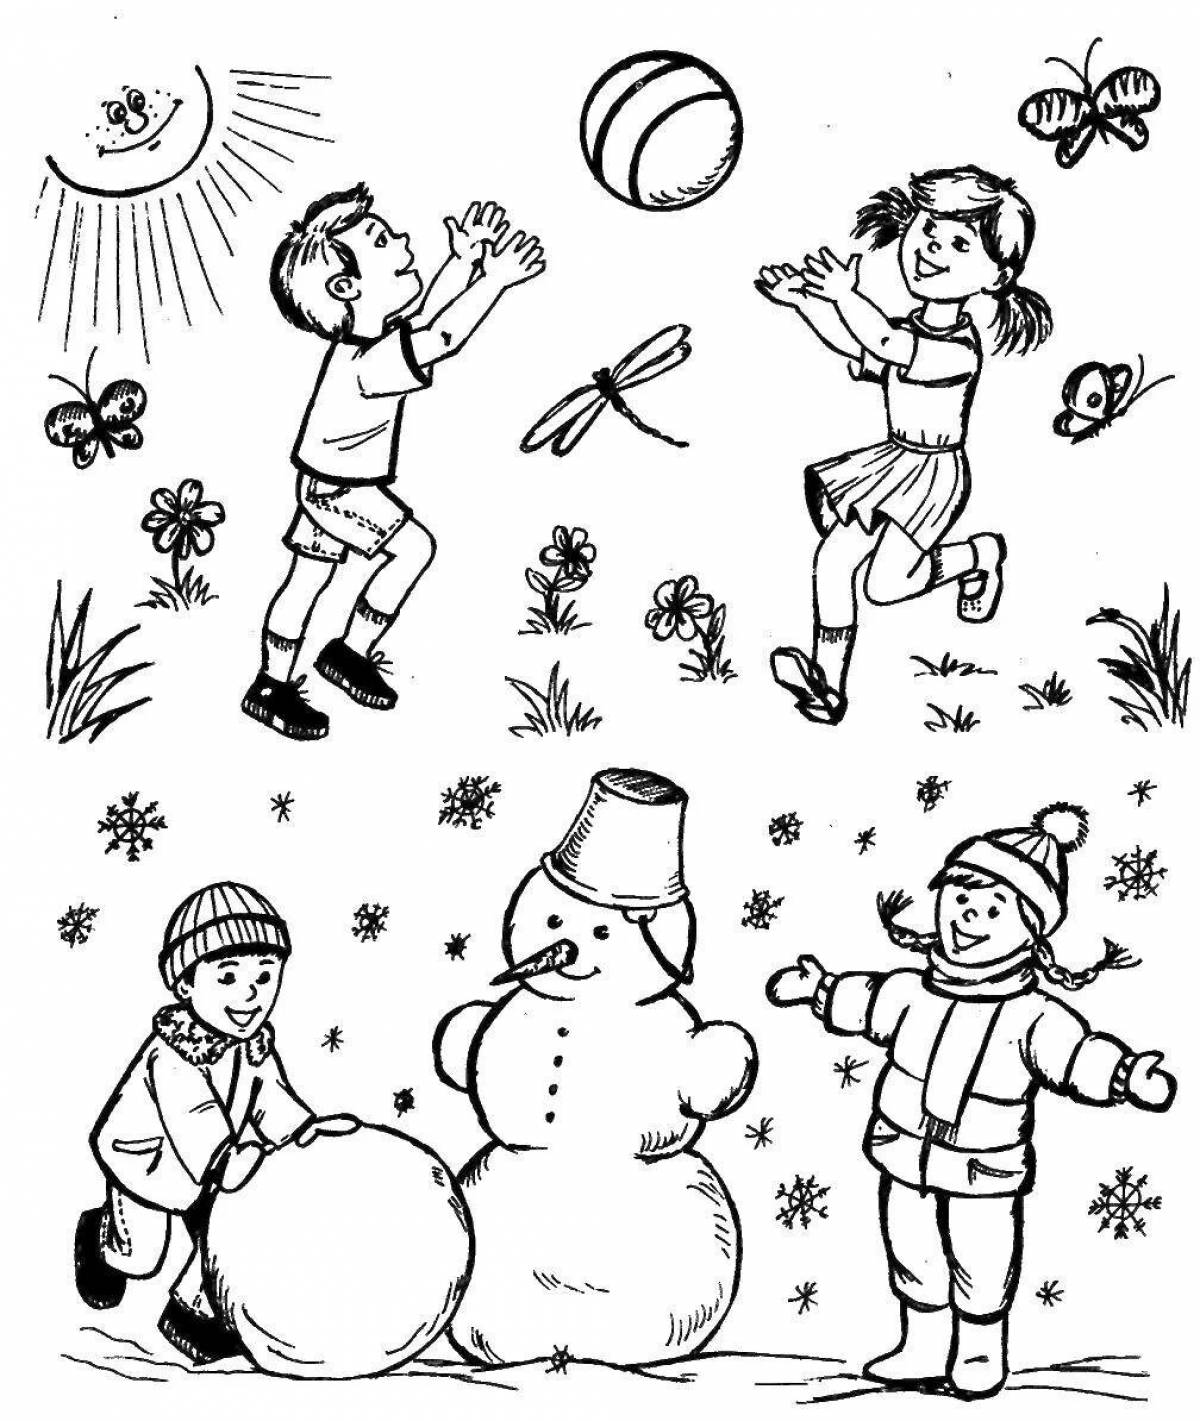 Signs of winter for kids #4